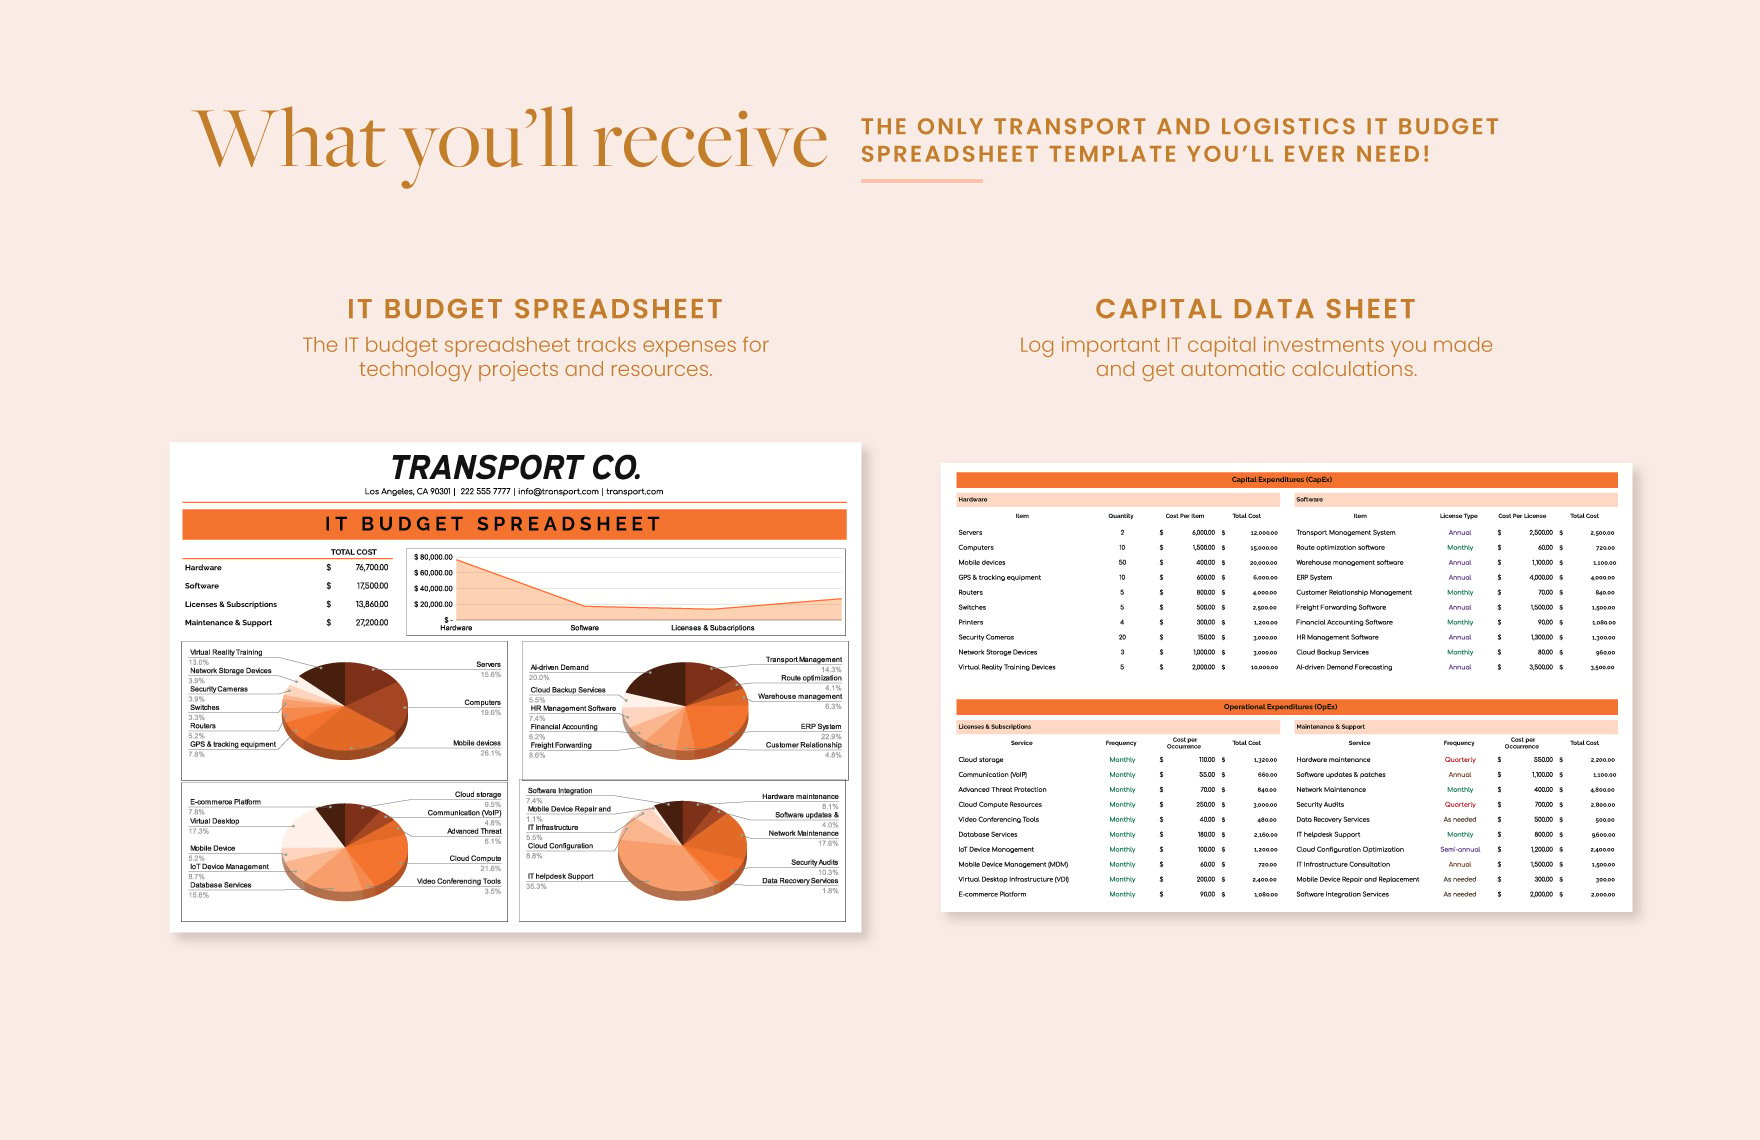 Transport and Logistics IT Budget Spreadsheet Template